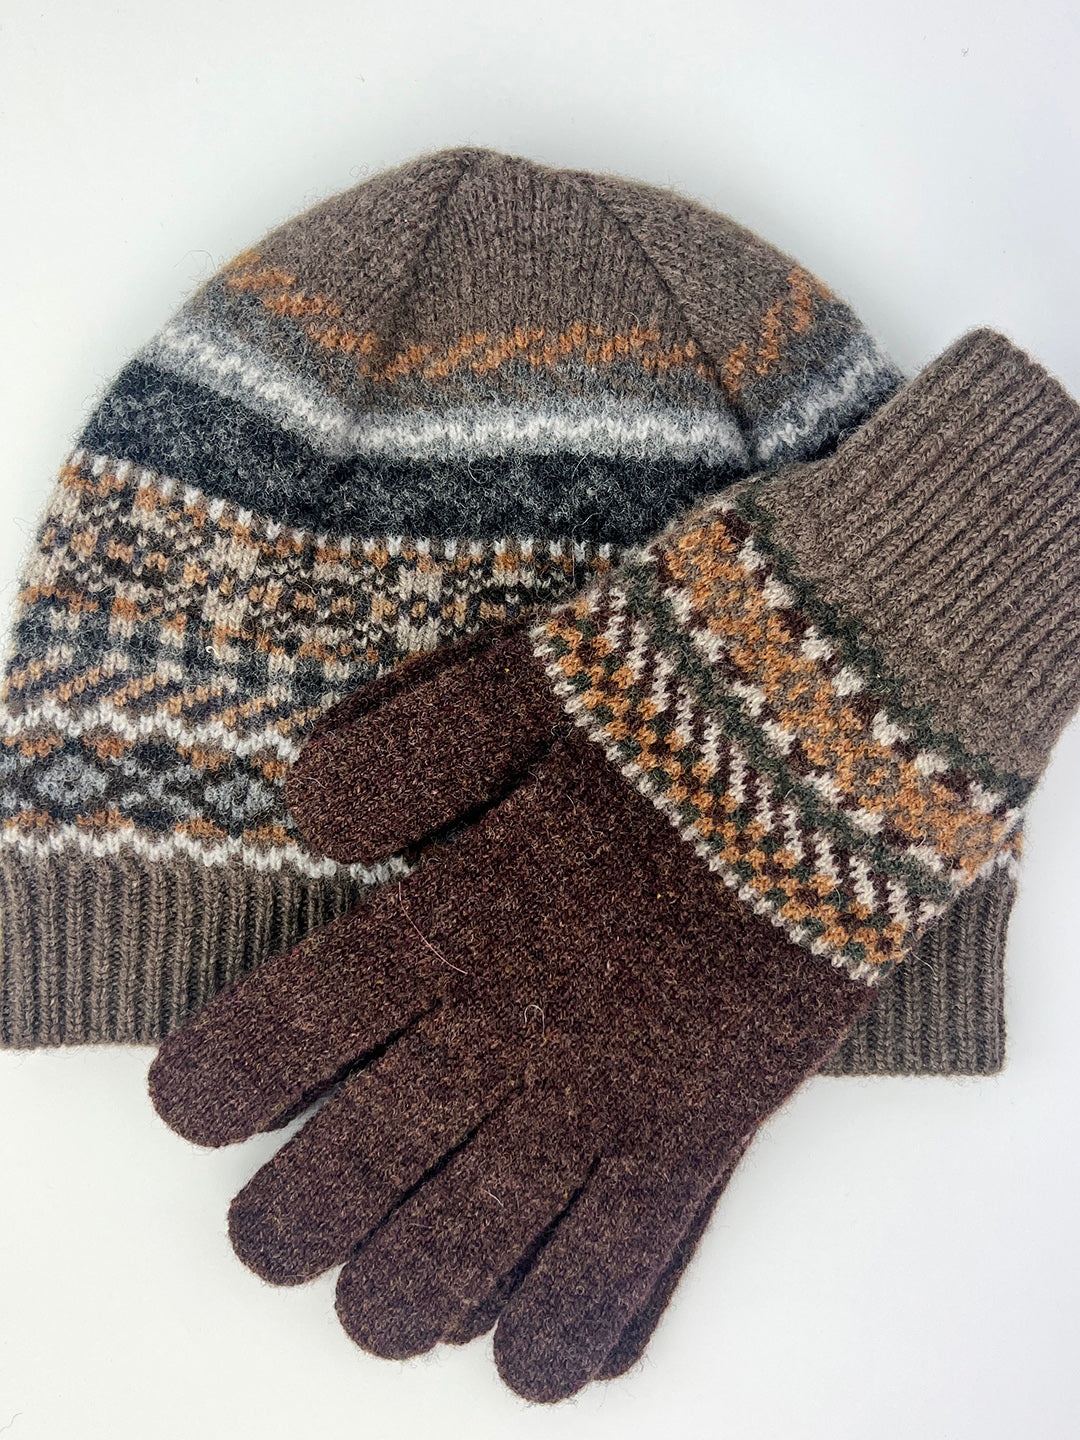 knitted patterned gloves in Loam colour way, Knitted in Scotland